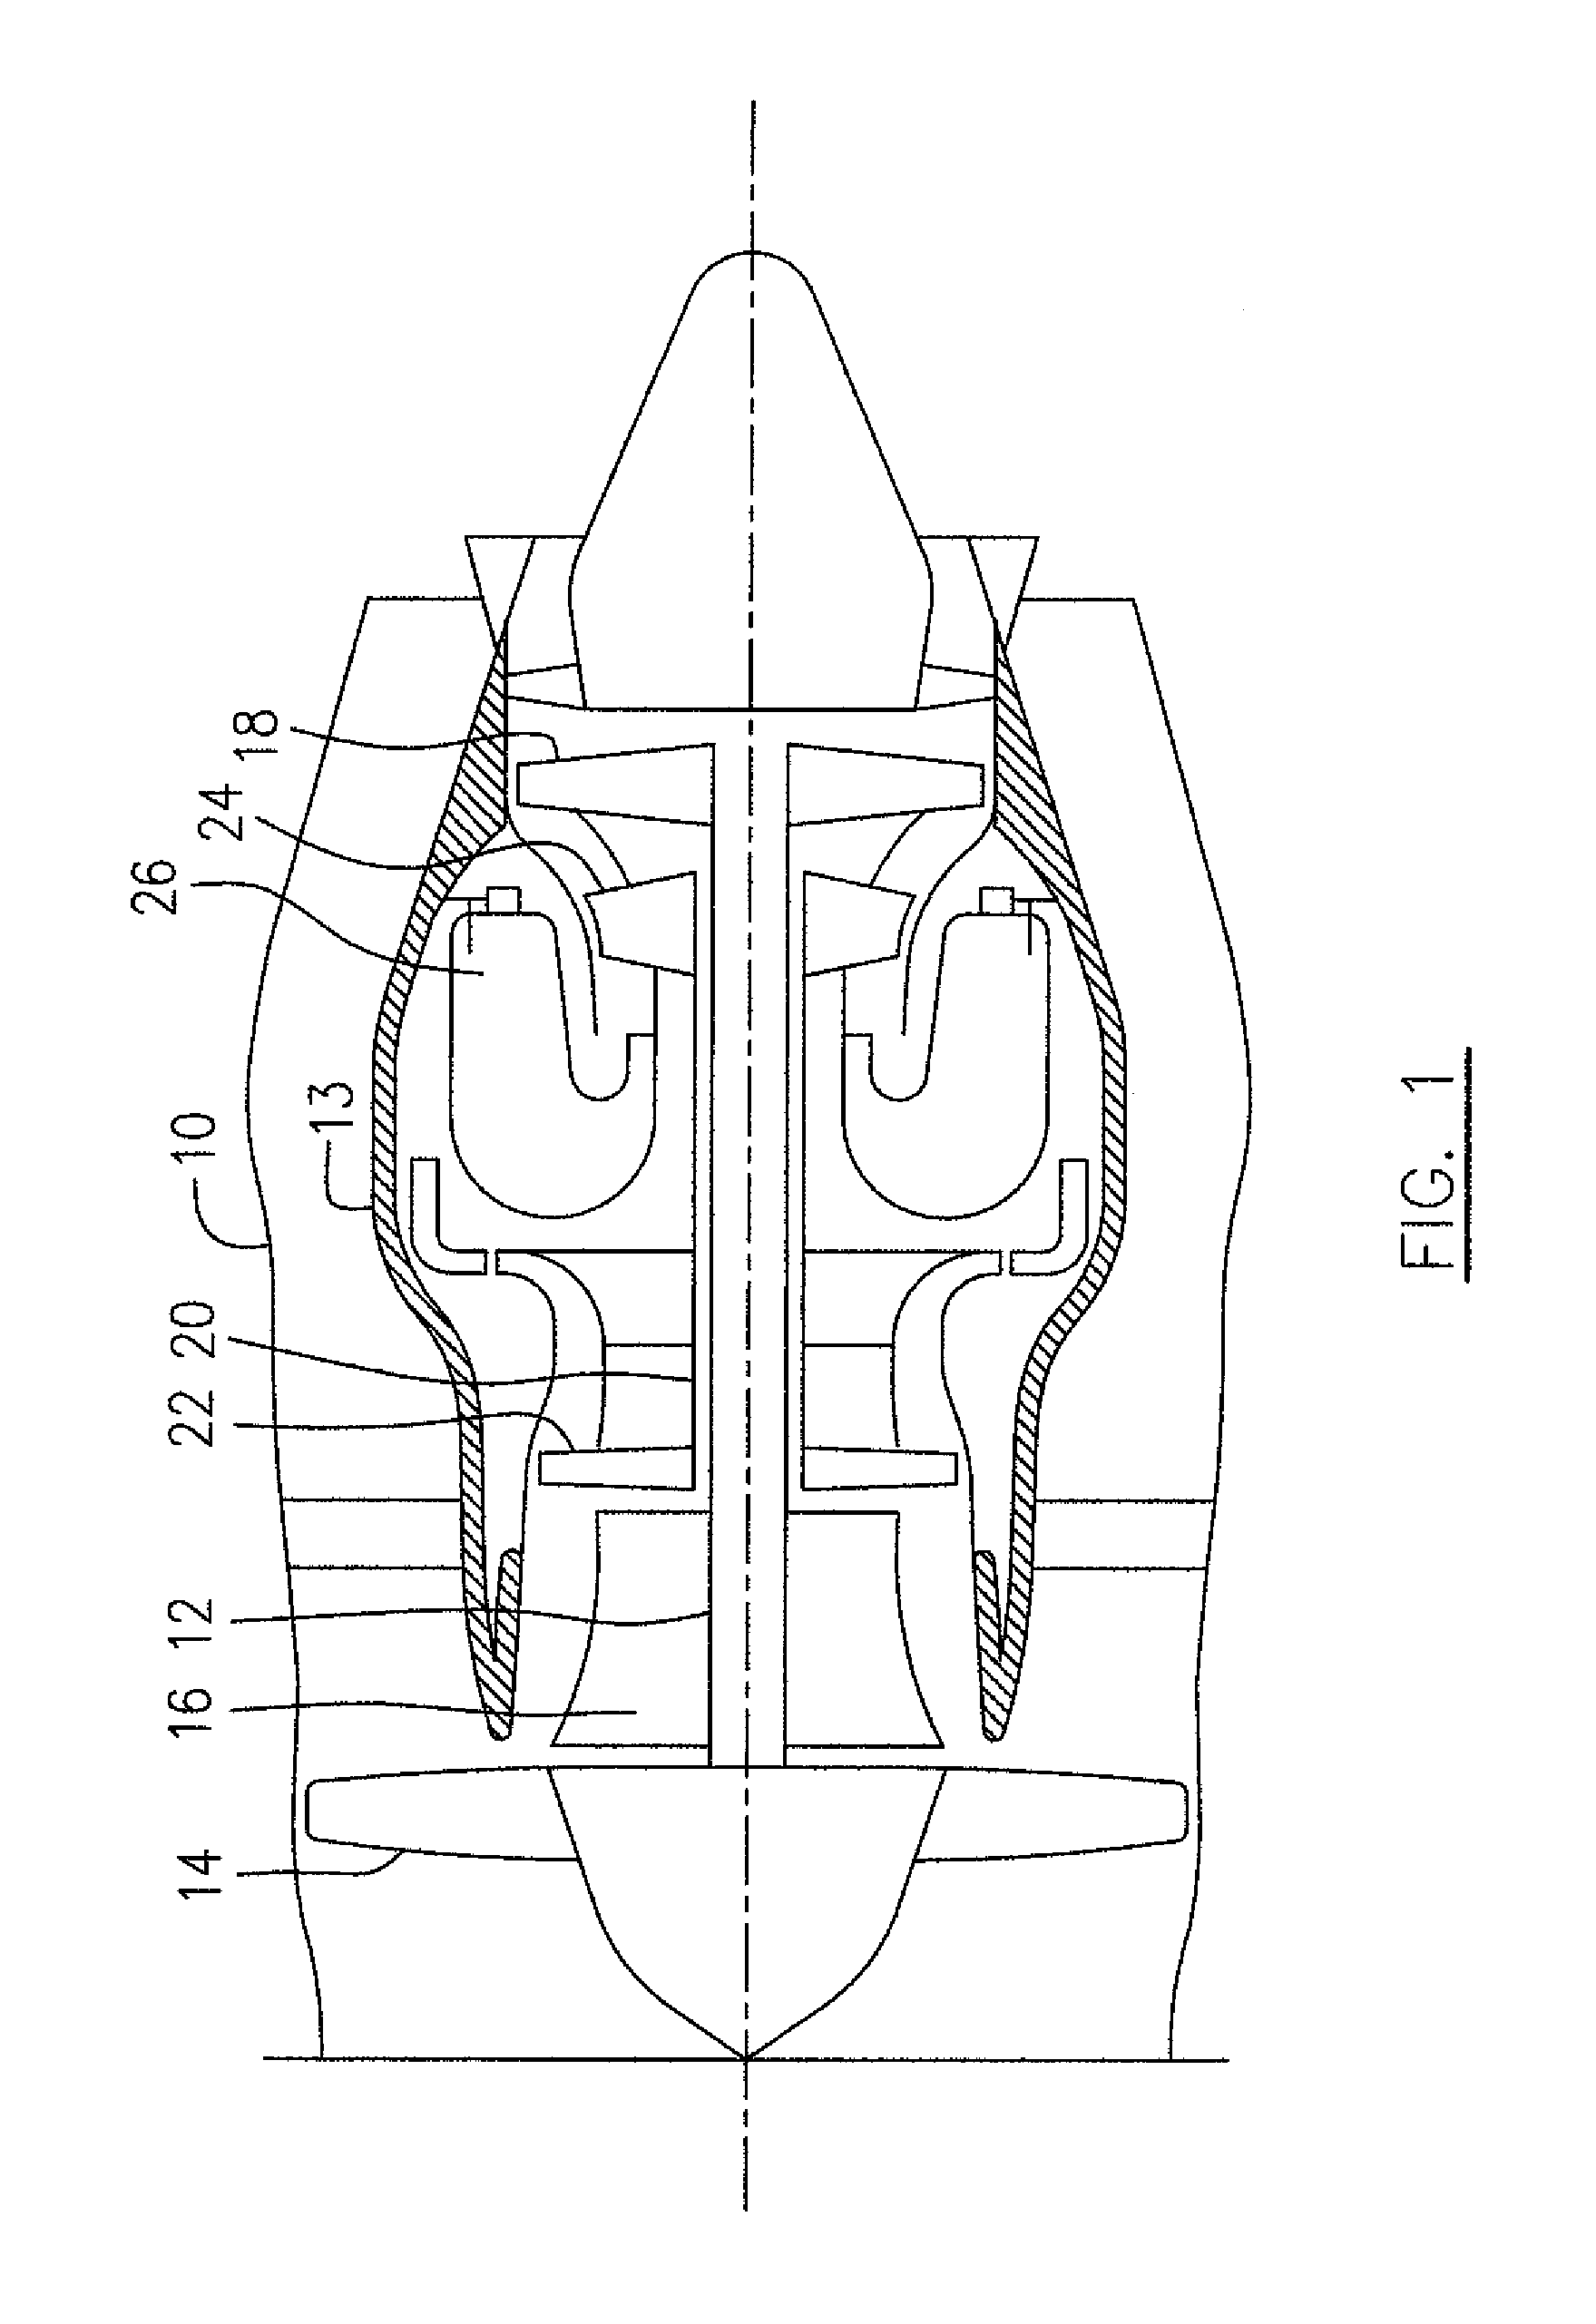 Laser drilling methods of shallow-angled holes